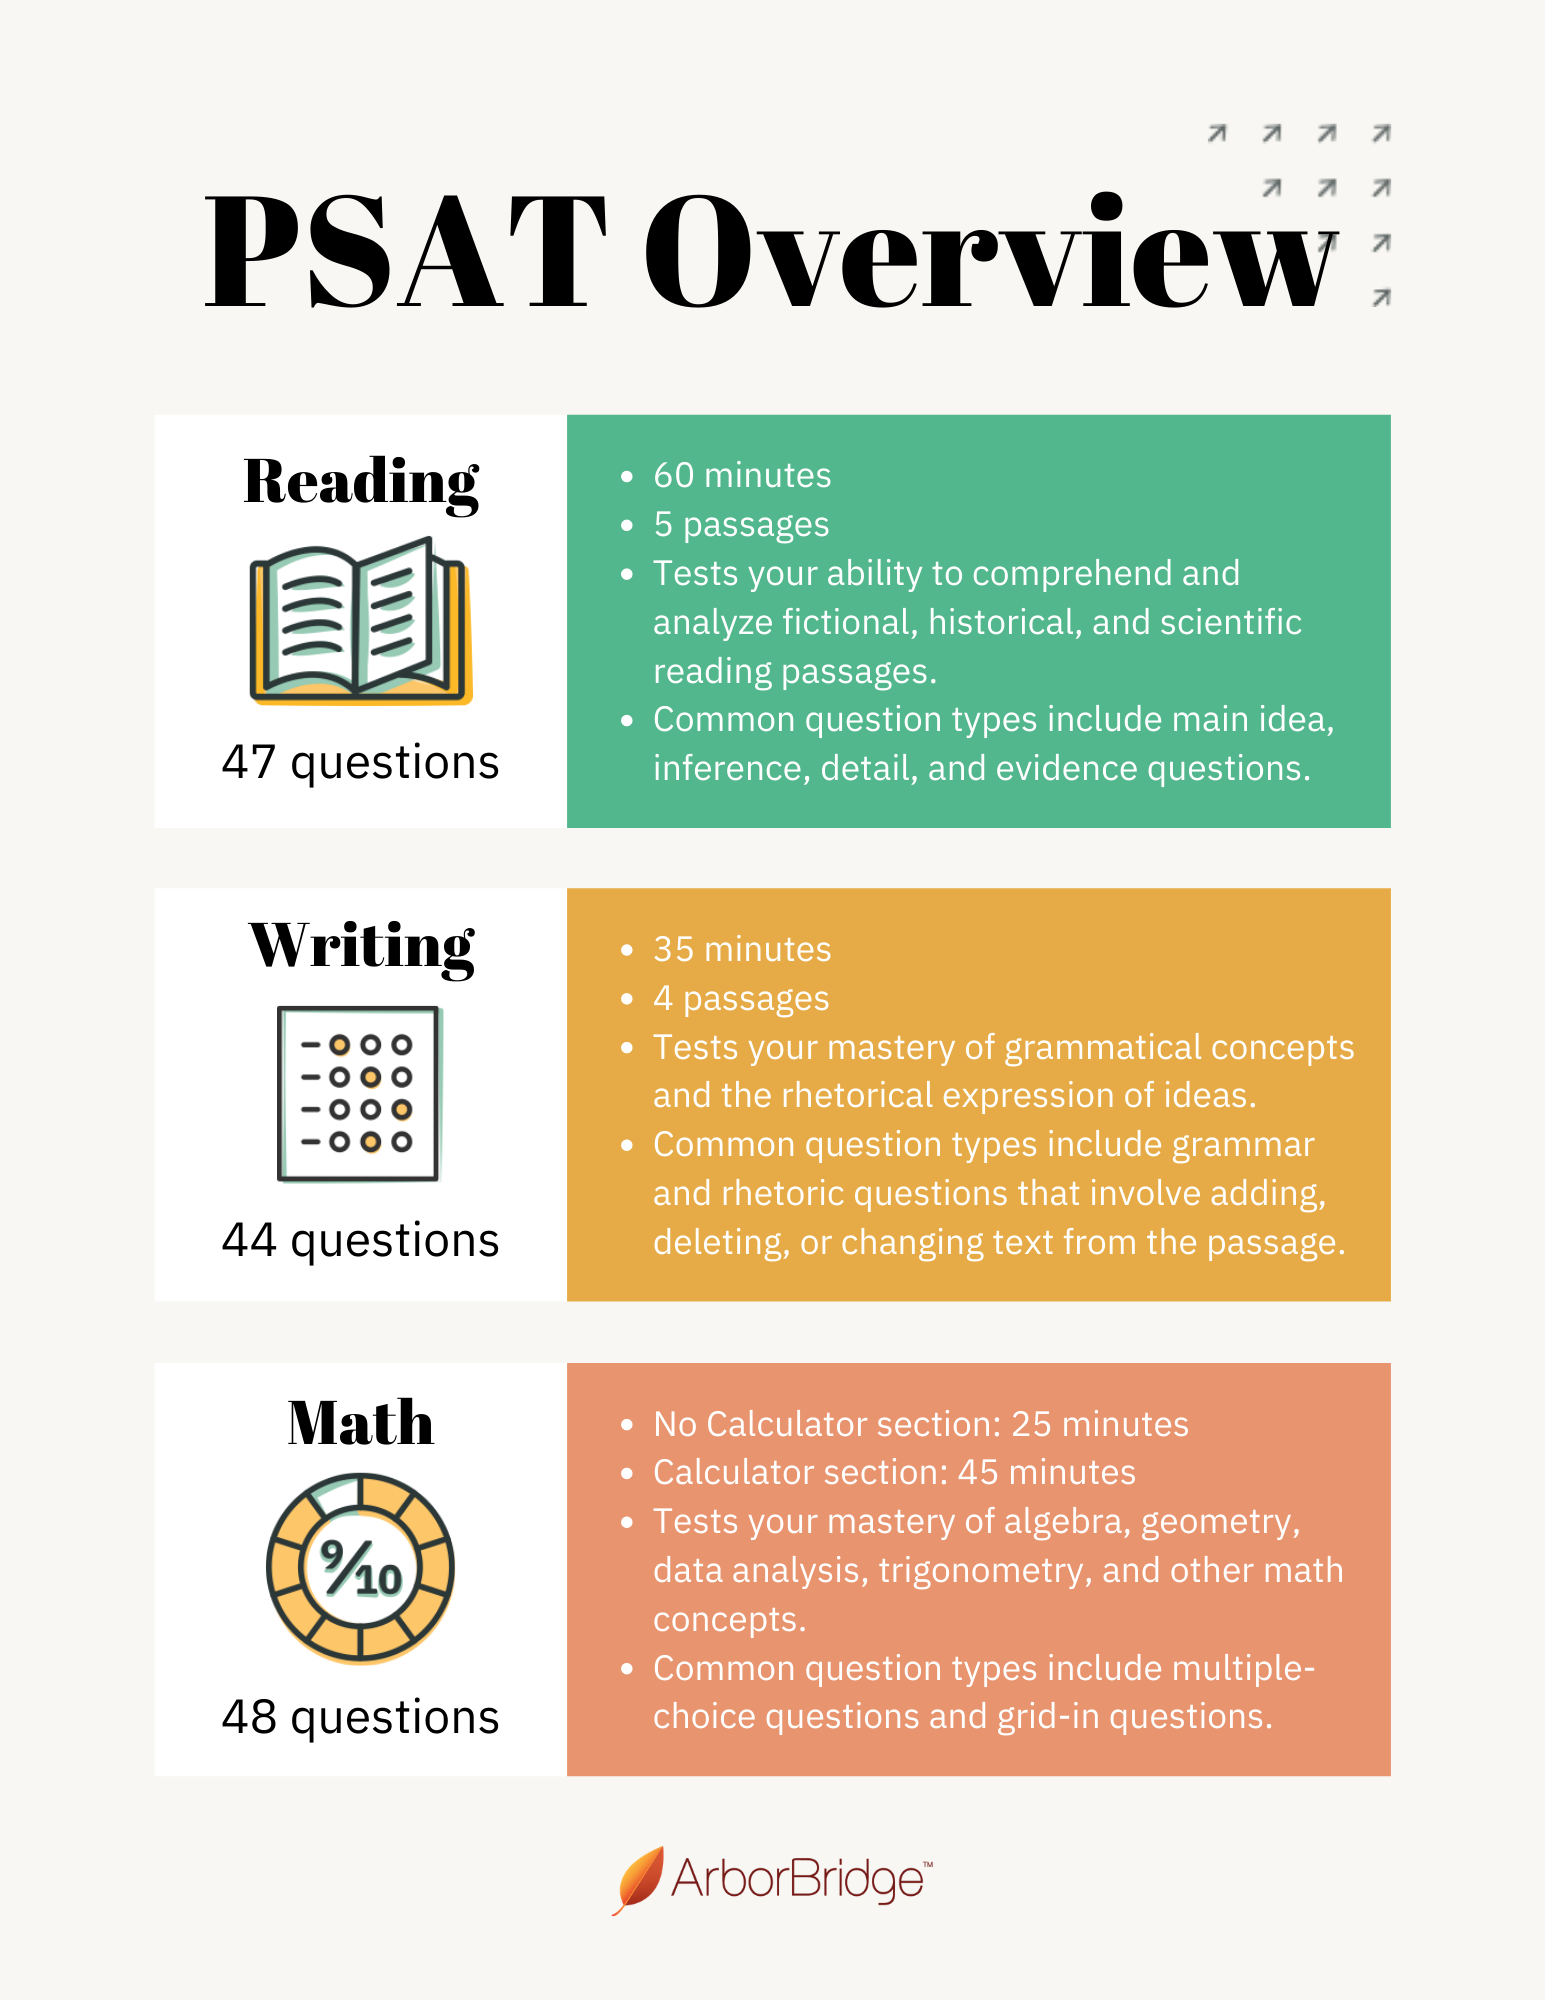 Familiarize yourself with the PSAT what is it and why should you take it?